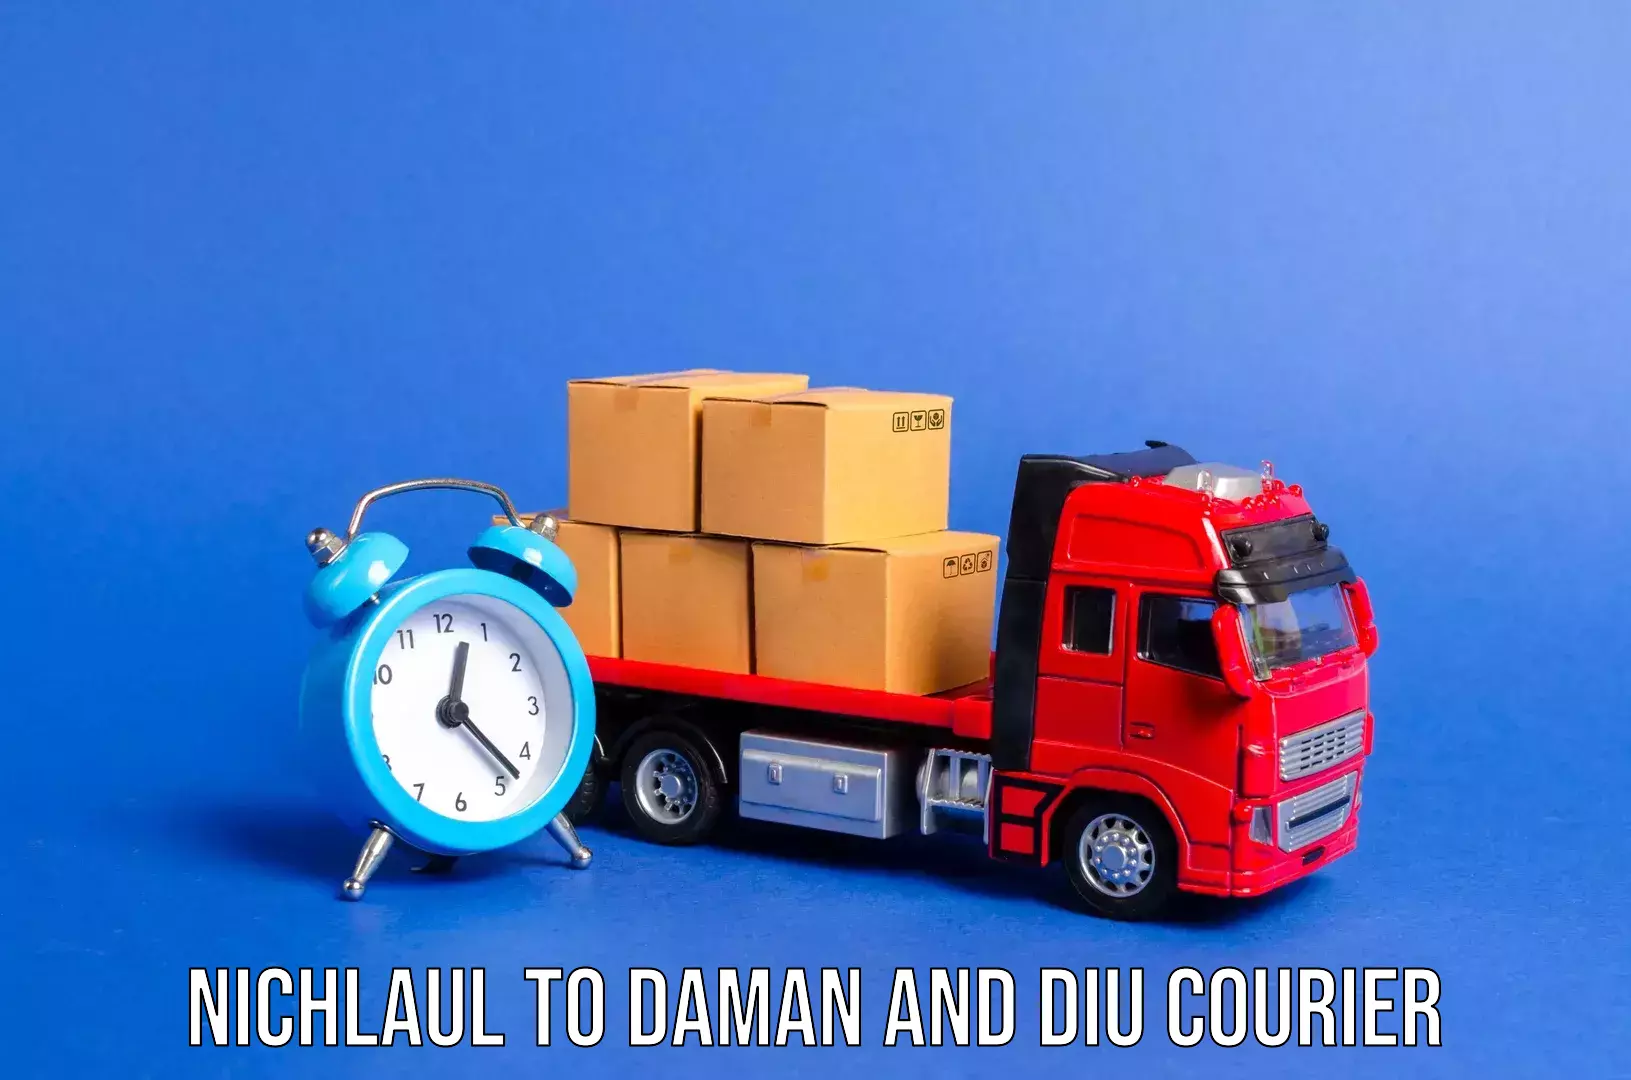 Baggage transport professionals Nichlaul to Daman and Diu